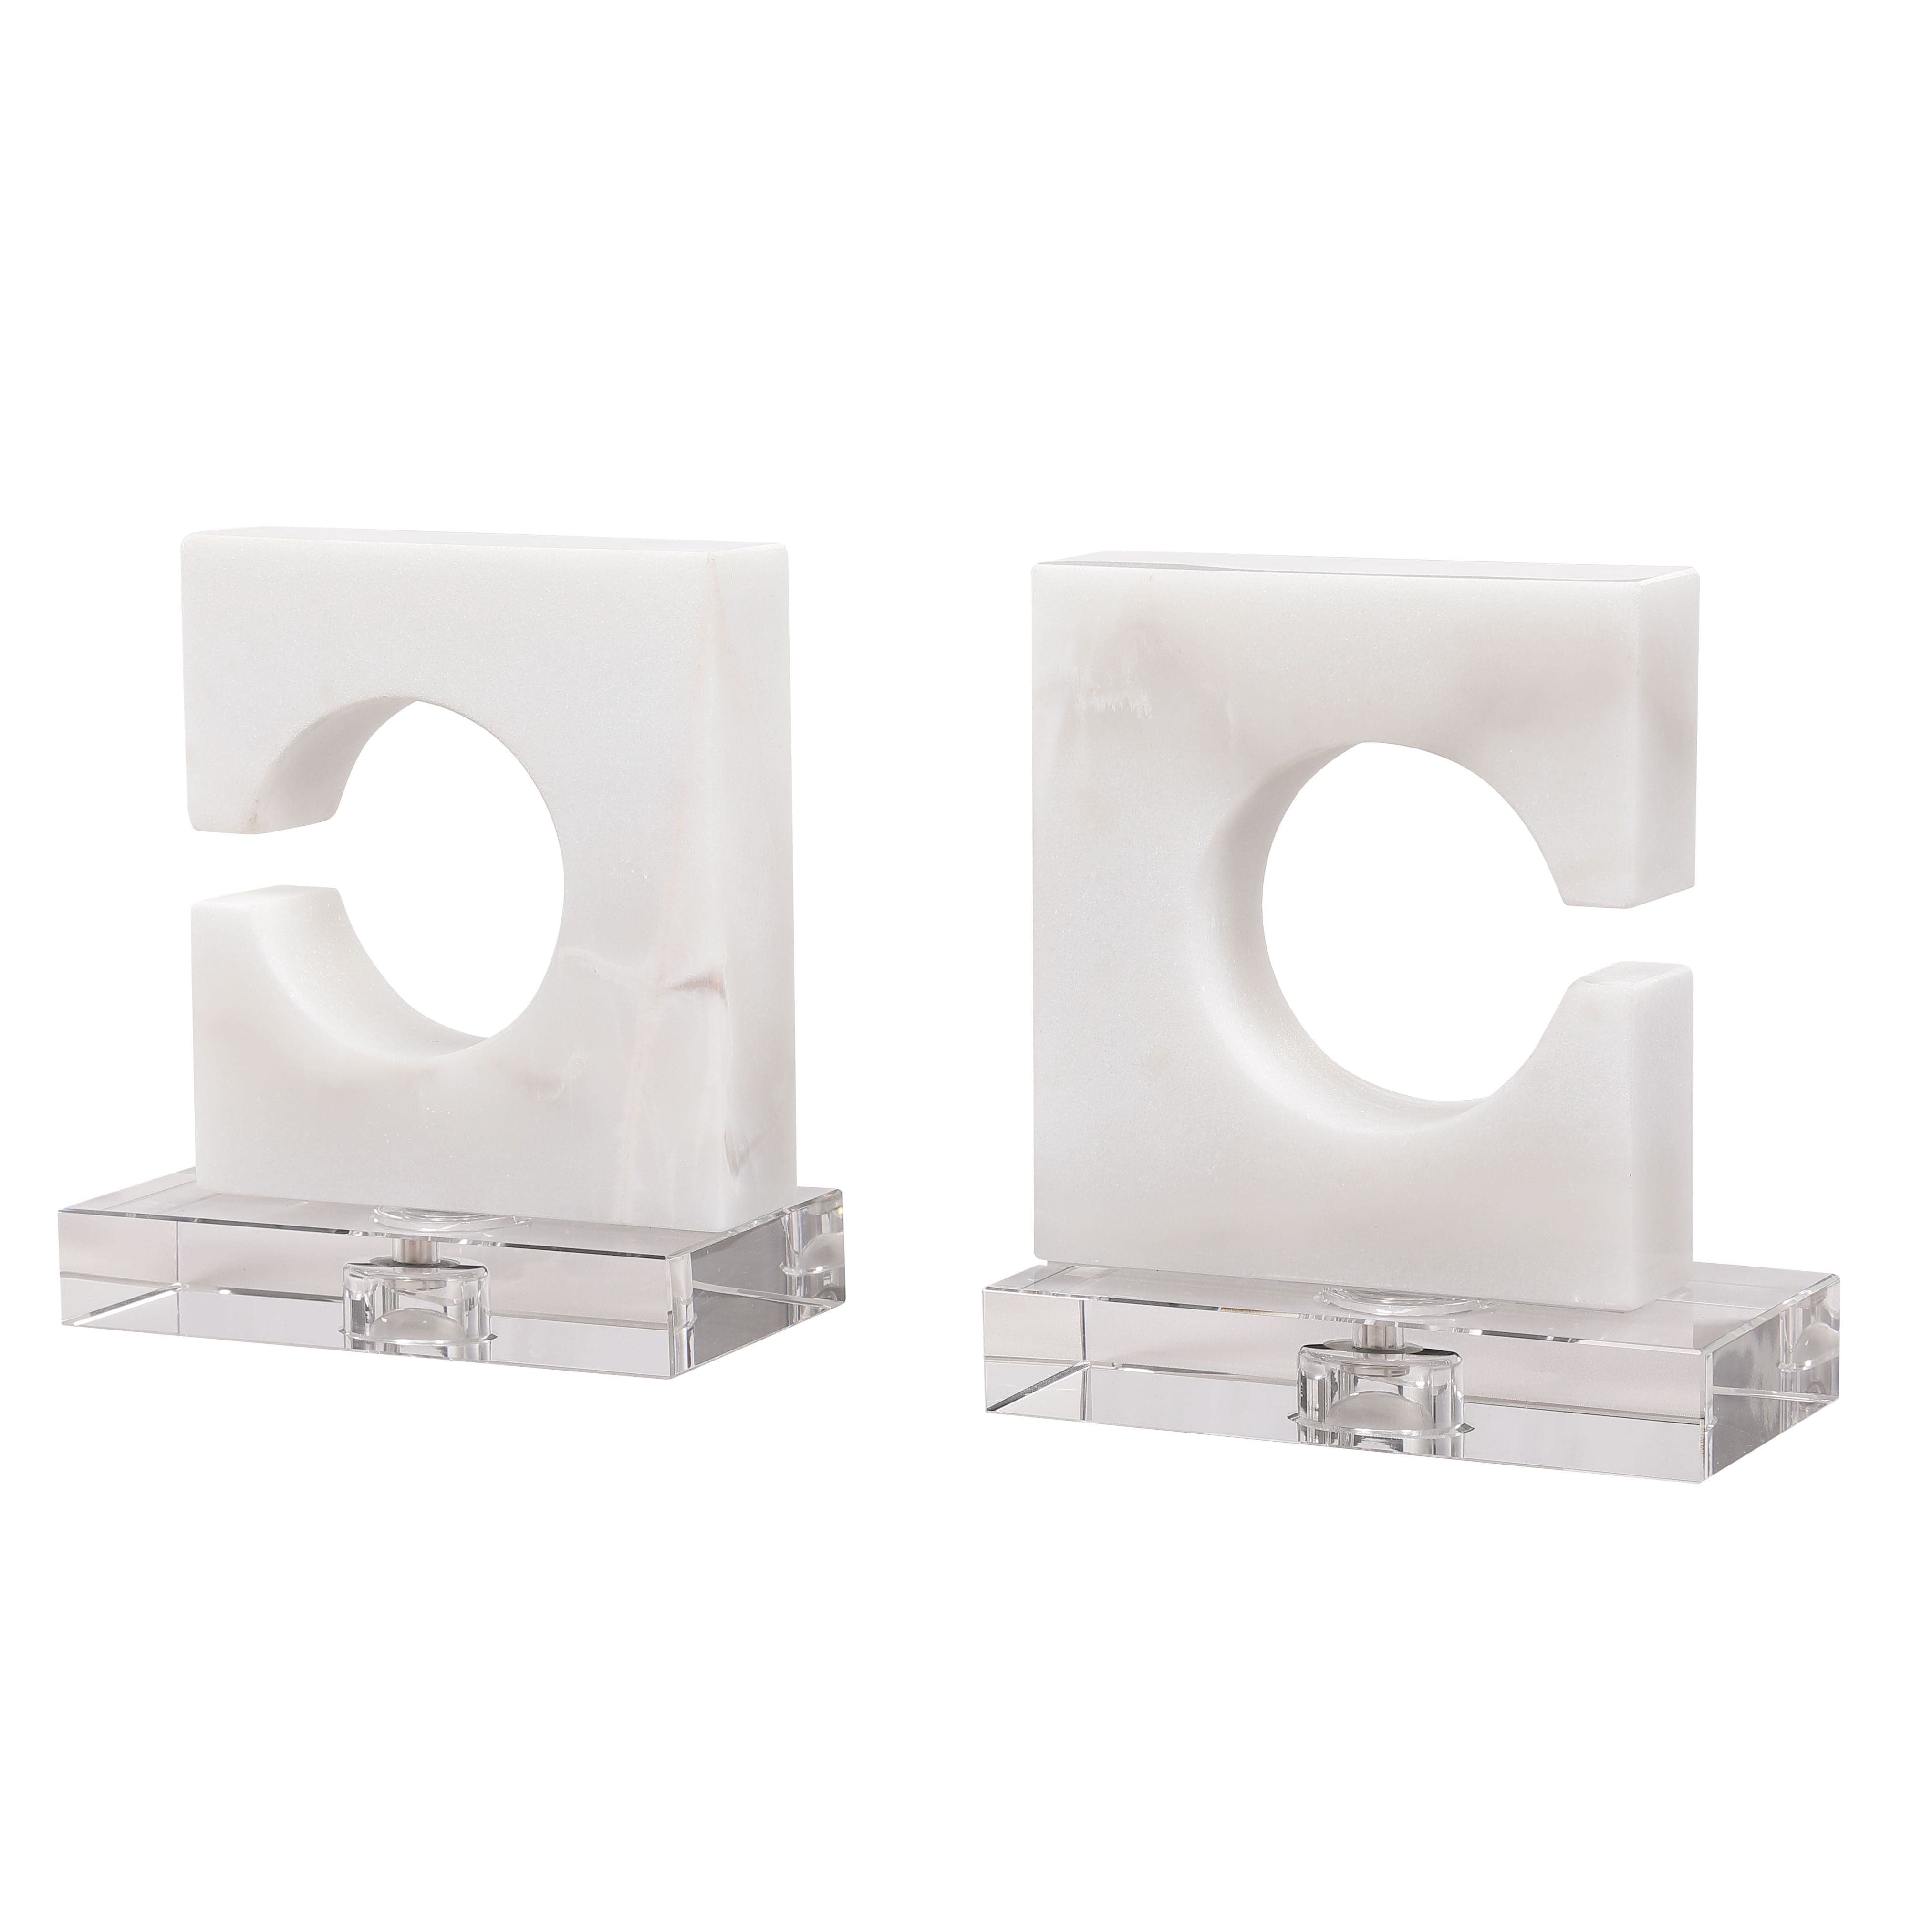 Clarin White & Gray Bookends (S/2) Uttermost